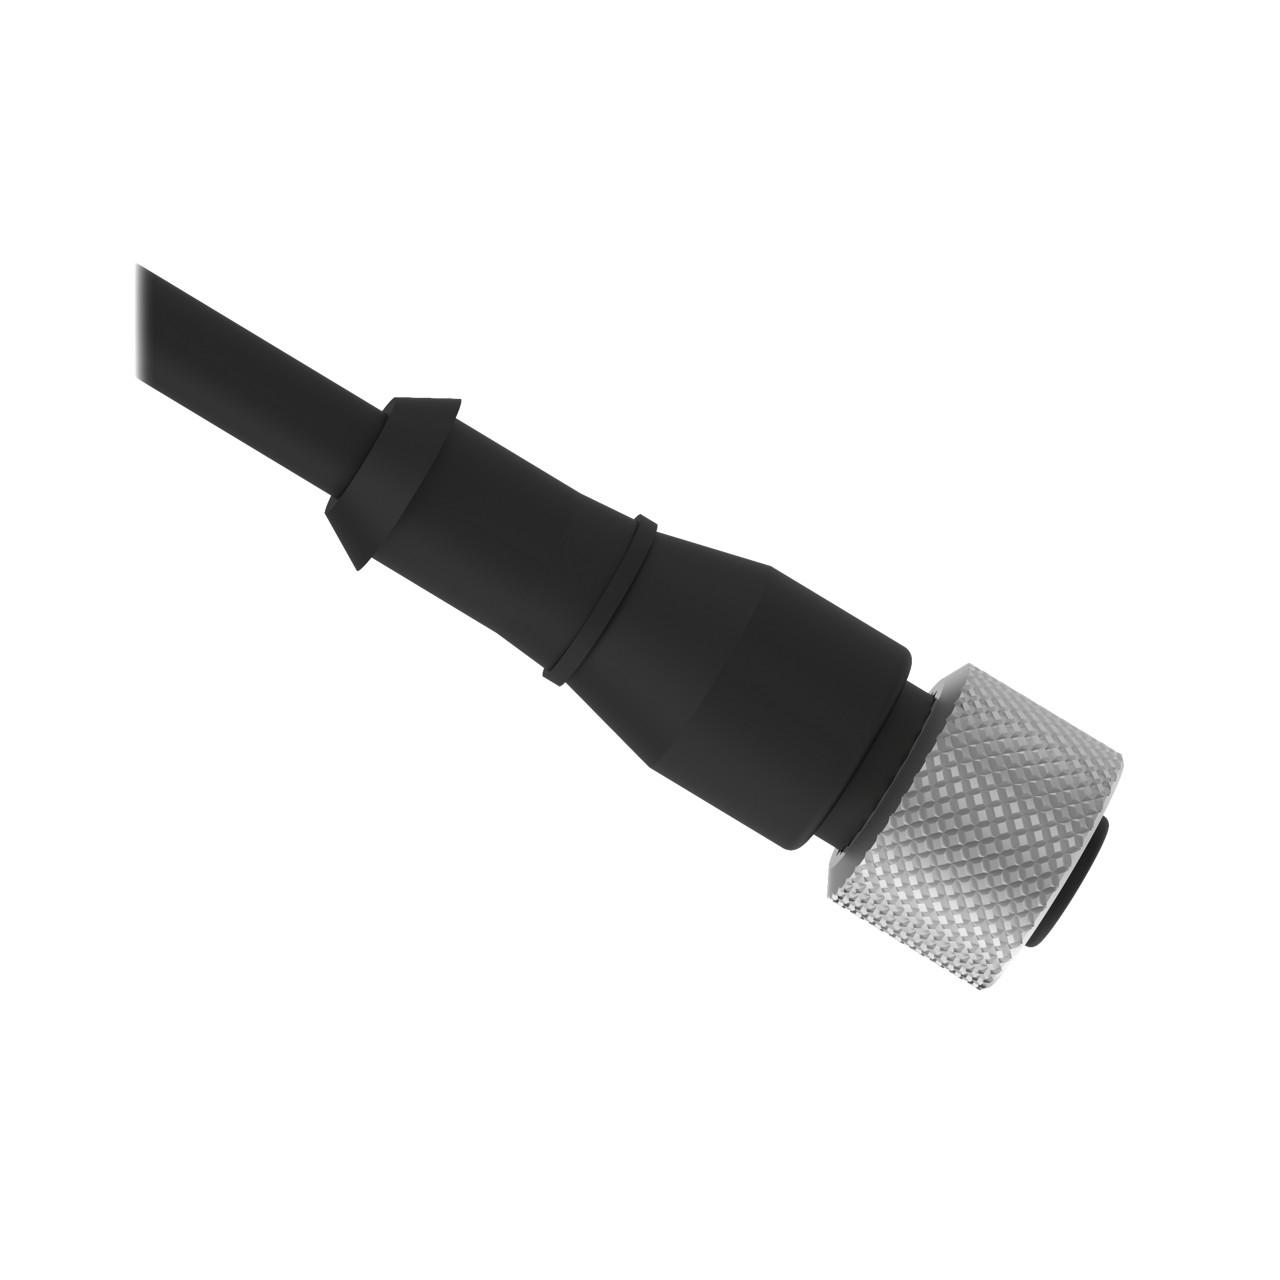 Banner MQDC-430 Euro-style Quick Disconnect Cable, 4-Pin Straight Connector, 9 m (30 ft) in Length, Nickel-plated Brass Coupling Nut